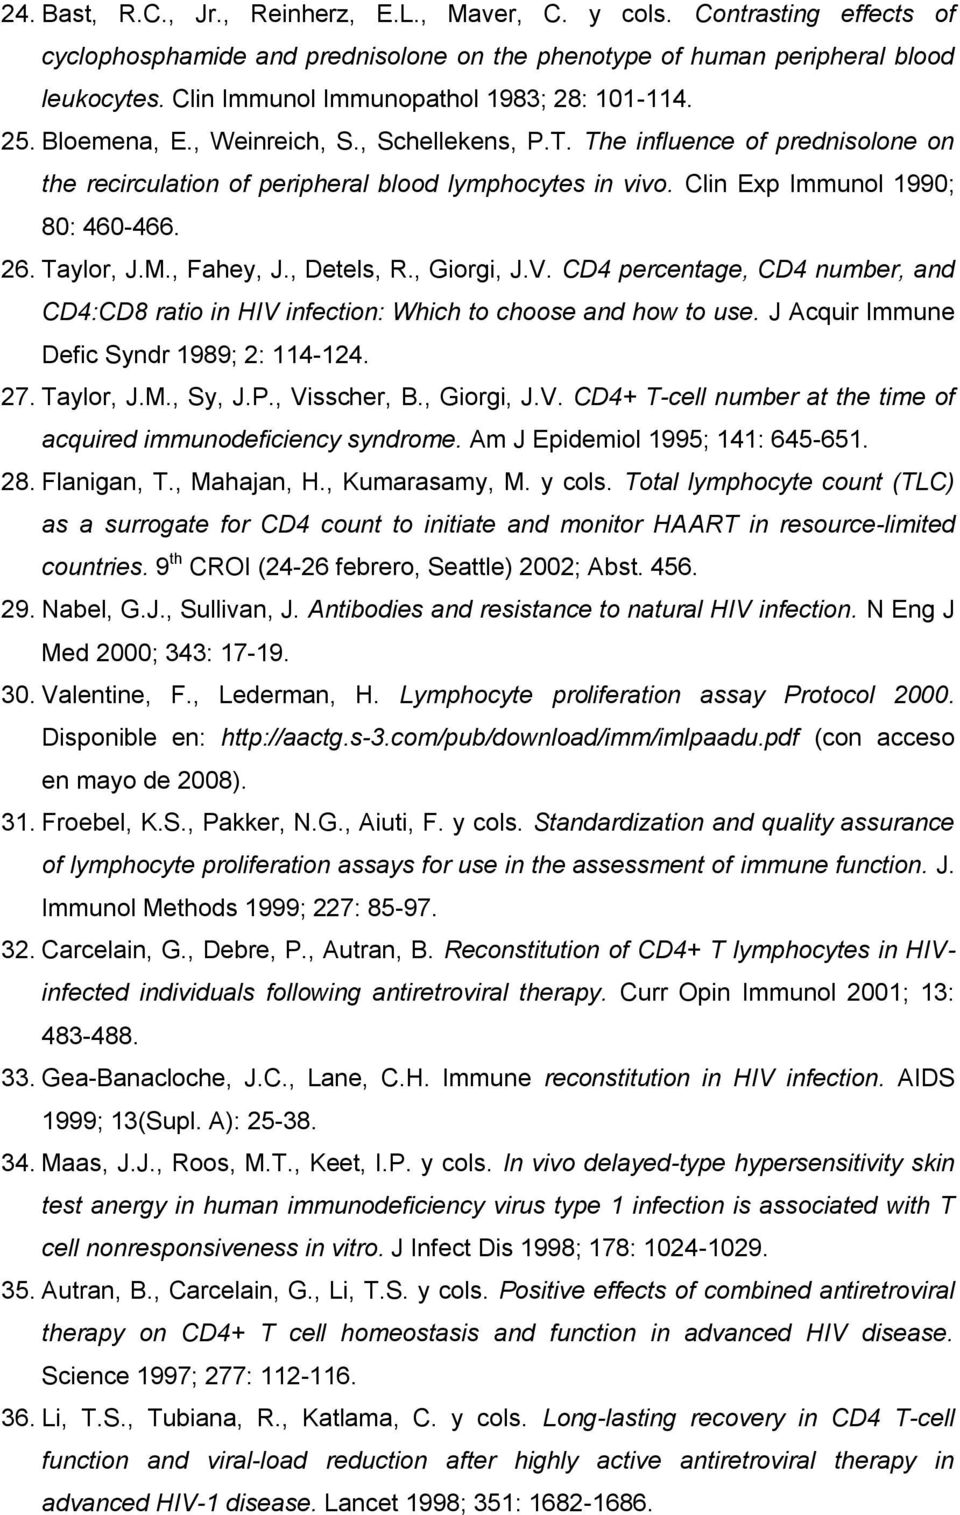 Clin Exp Immunol 1990; 80: 460-466. 26. Taylor, J.M., Fahey, J., Detels, R., Giorgi, J.V. CD4 percentage, CD4 number, and CD4:CD8 ratio in HIV infection: Which to choose and how to use.